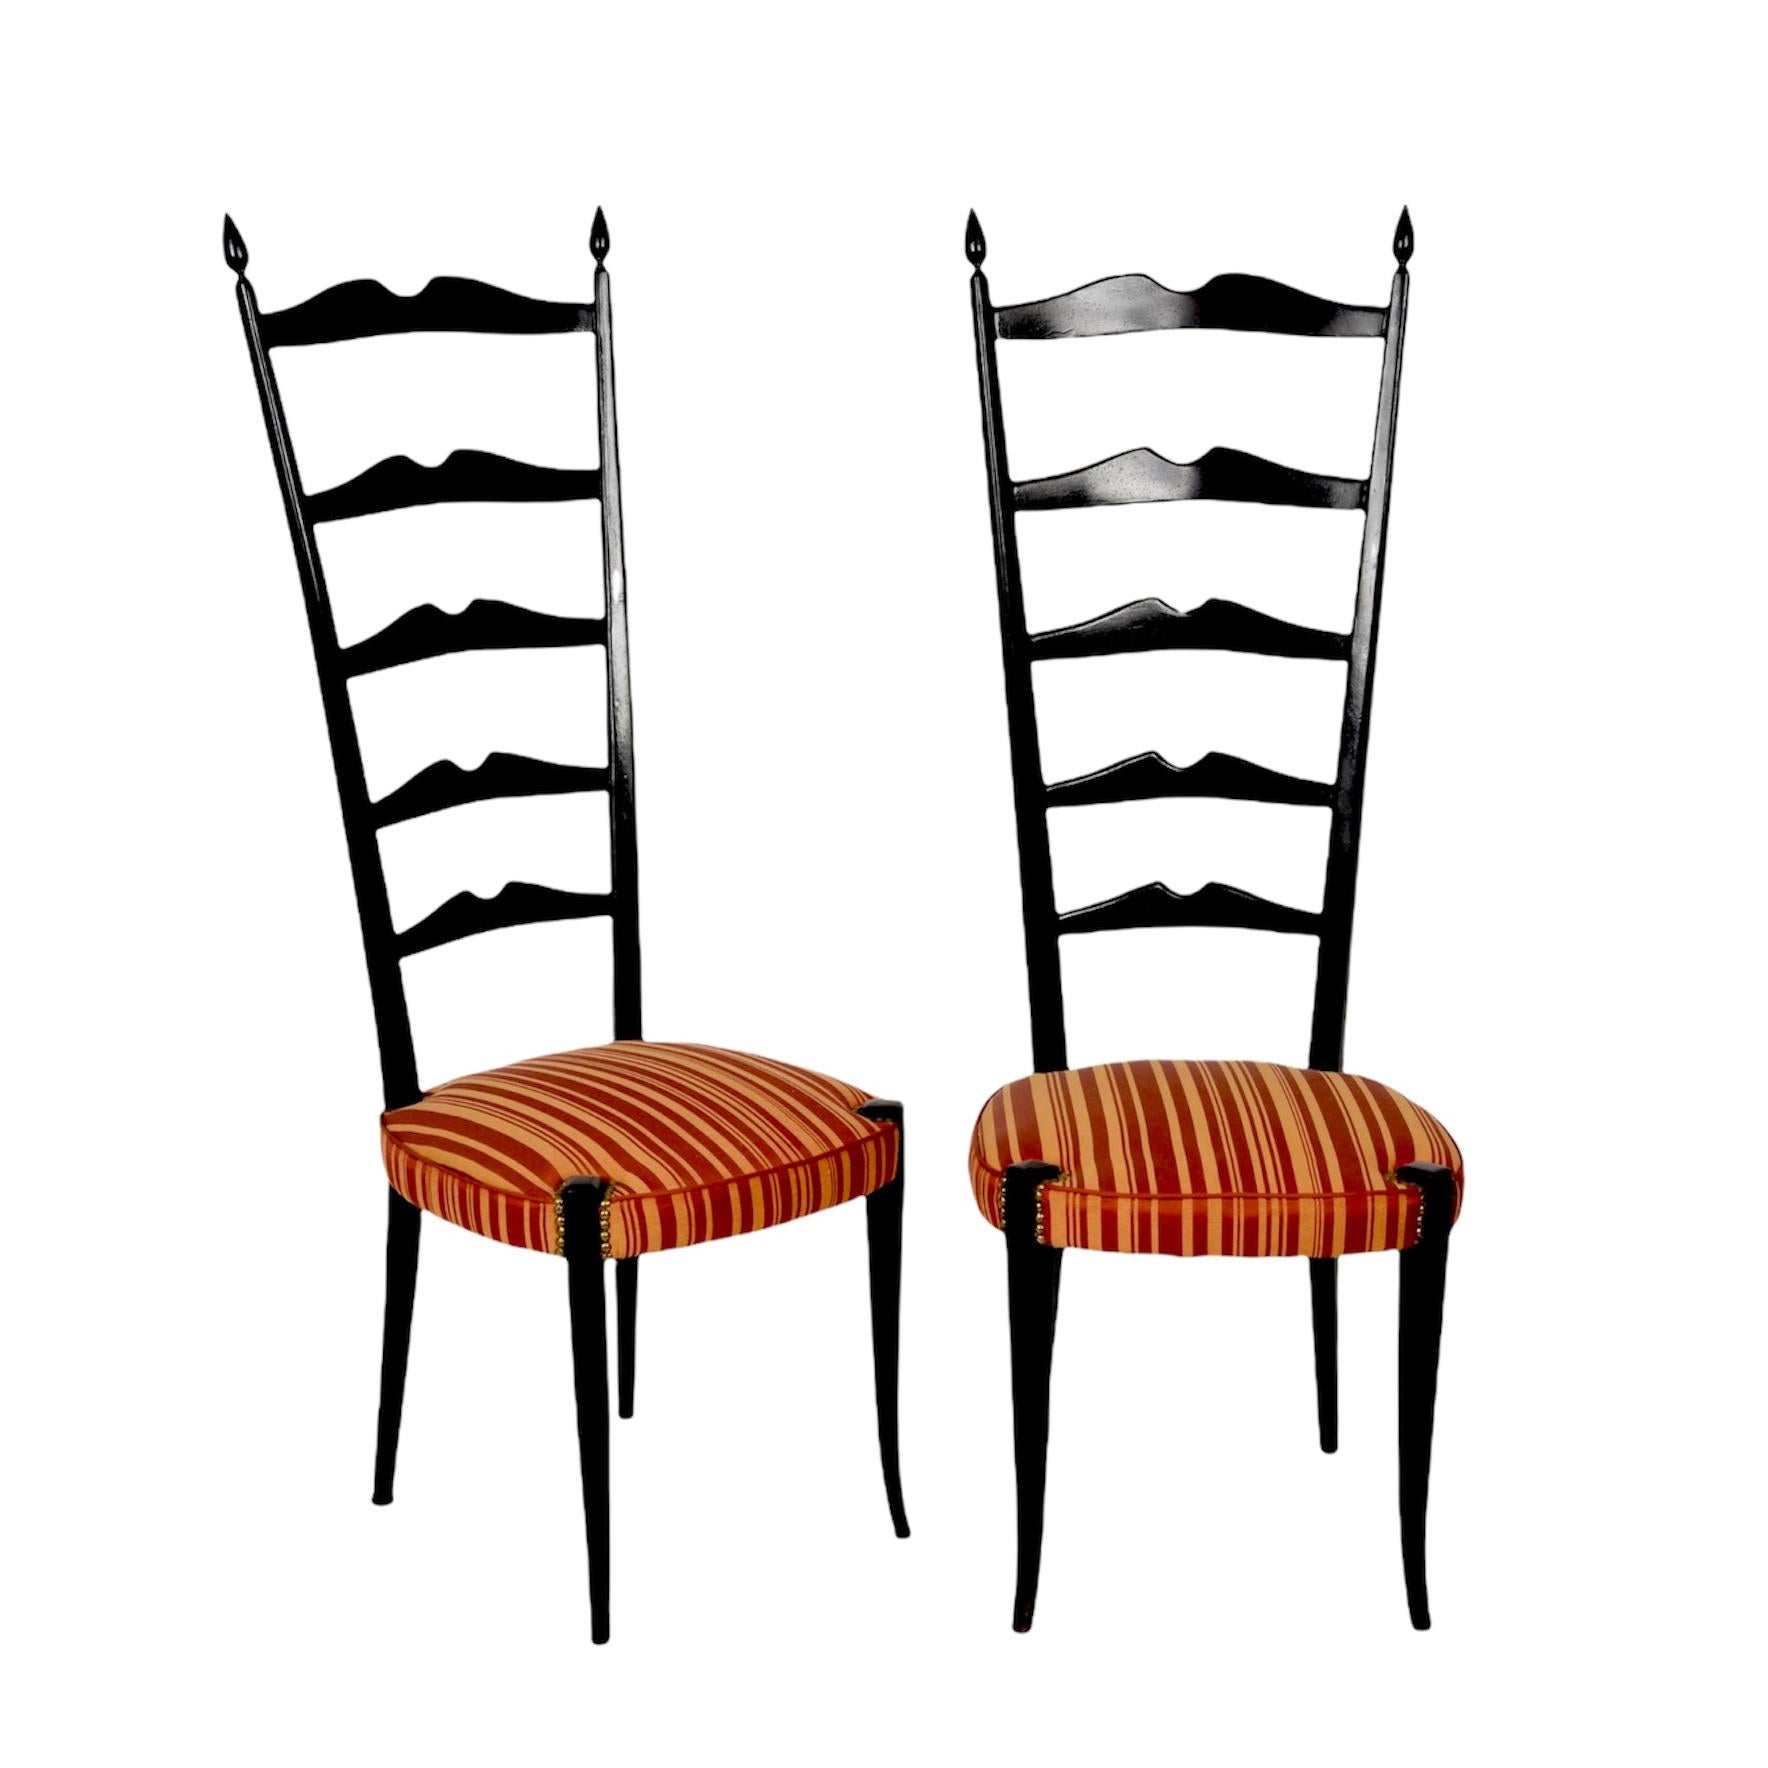 Pair of amazing high back ladder chairs in dark stained beechwood with metal spring seats and cushion. These fantastic pieces were designed by Paolo Buffa Chiavari during the 1950s in Italy.

These fantastic chairs are fantastic pieces as they